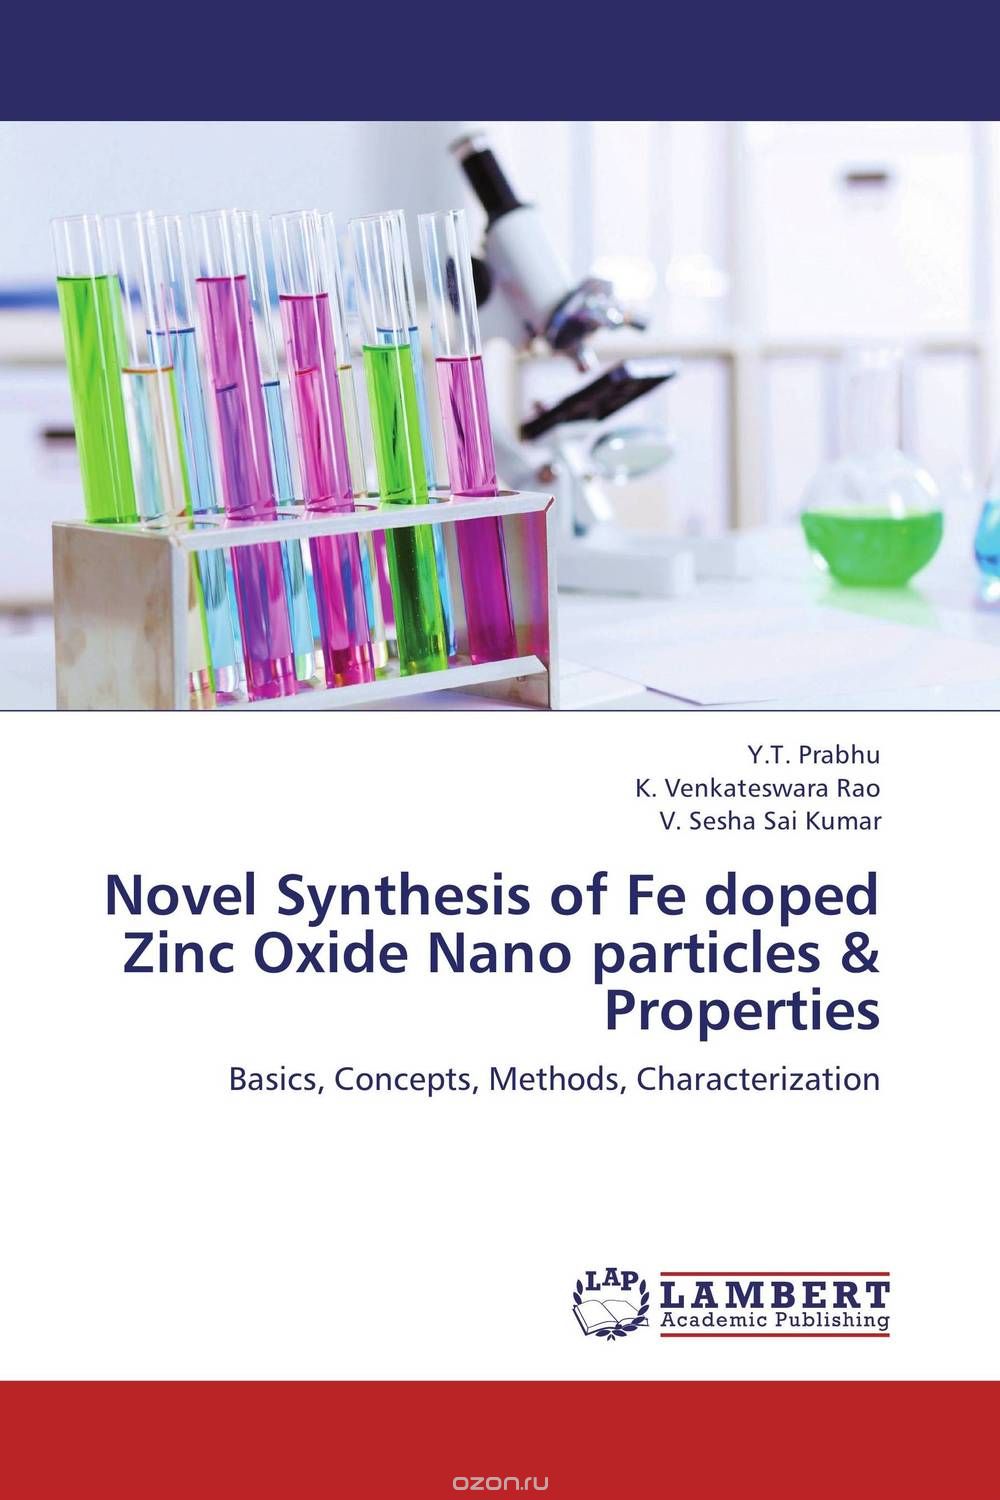 Novel Synthesis of Fe doped Zinc Oxide Nano particles & Properties